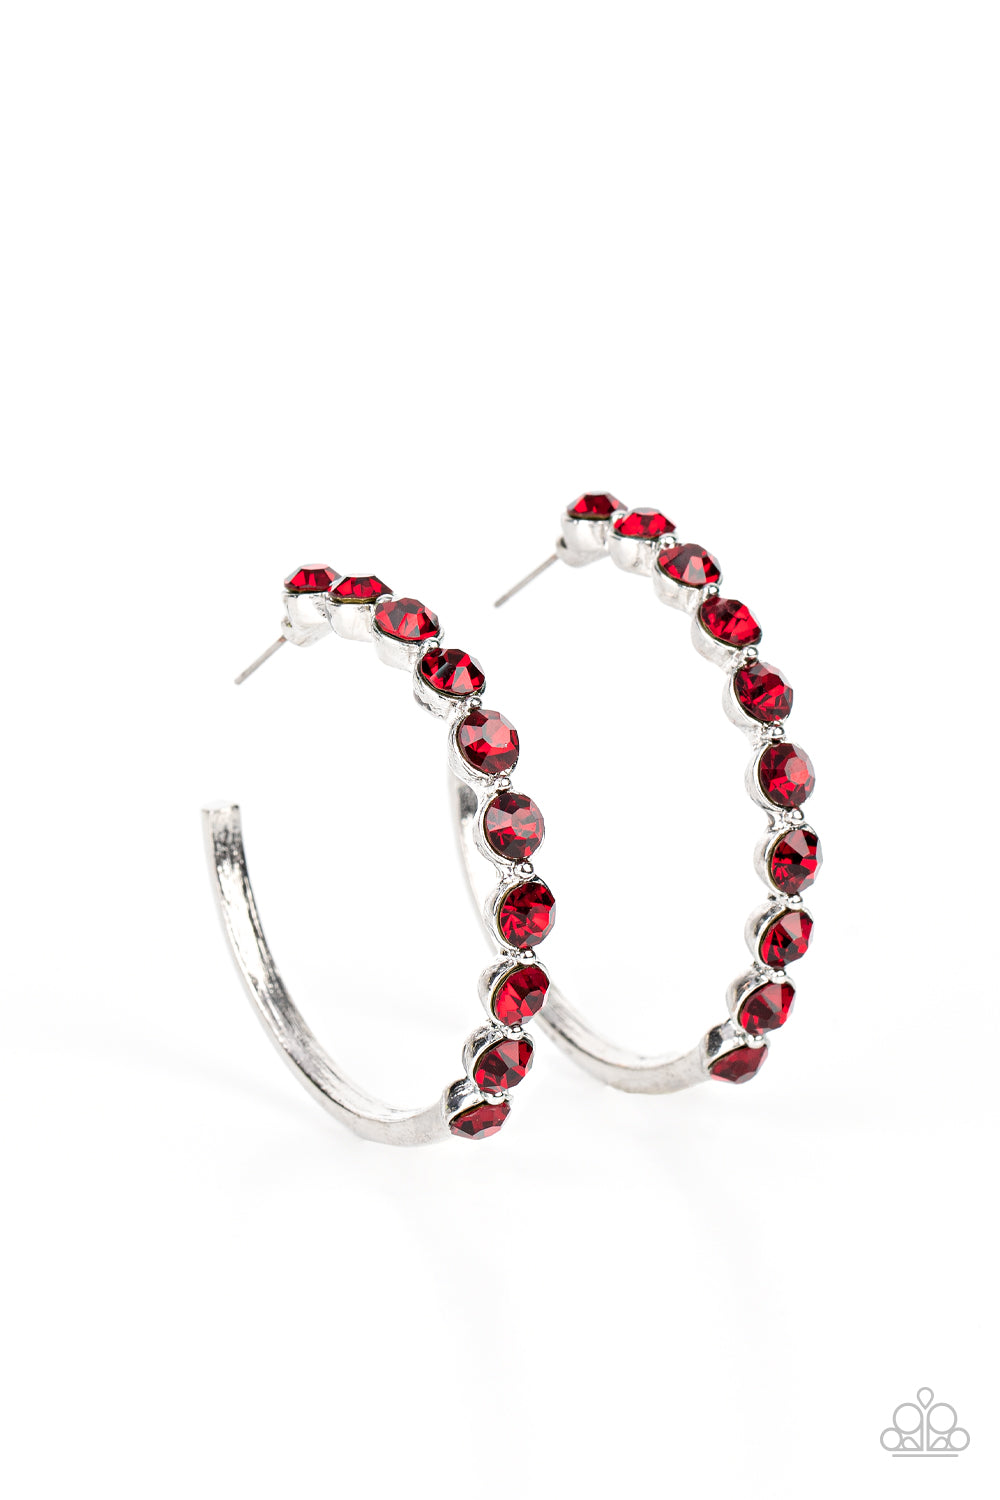 Photo Finish - Red Rhinestone Hoop Earrings - Paparazzi Accessories the front of a bold silver hoop is encrusted in fiery red rhinestones, creating a glamorous pop of sparkle. Earring attaches to a standard post fitting. Hoop measures approximately 1 3/4" in diameter.  Sold as one pair of hoop earrings.